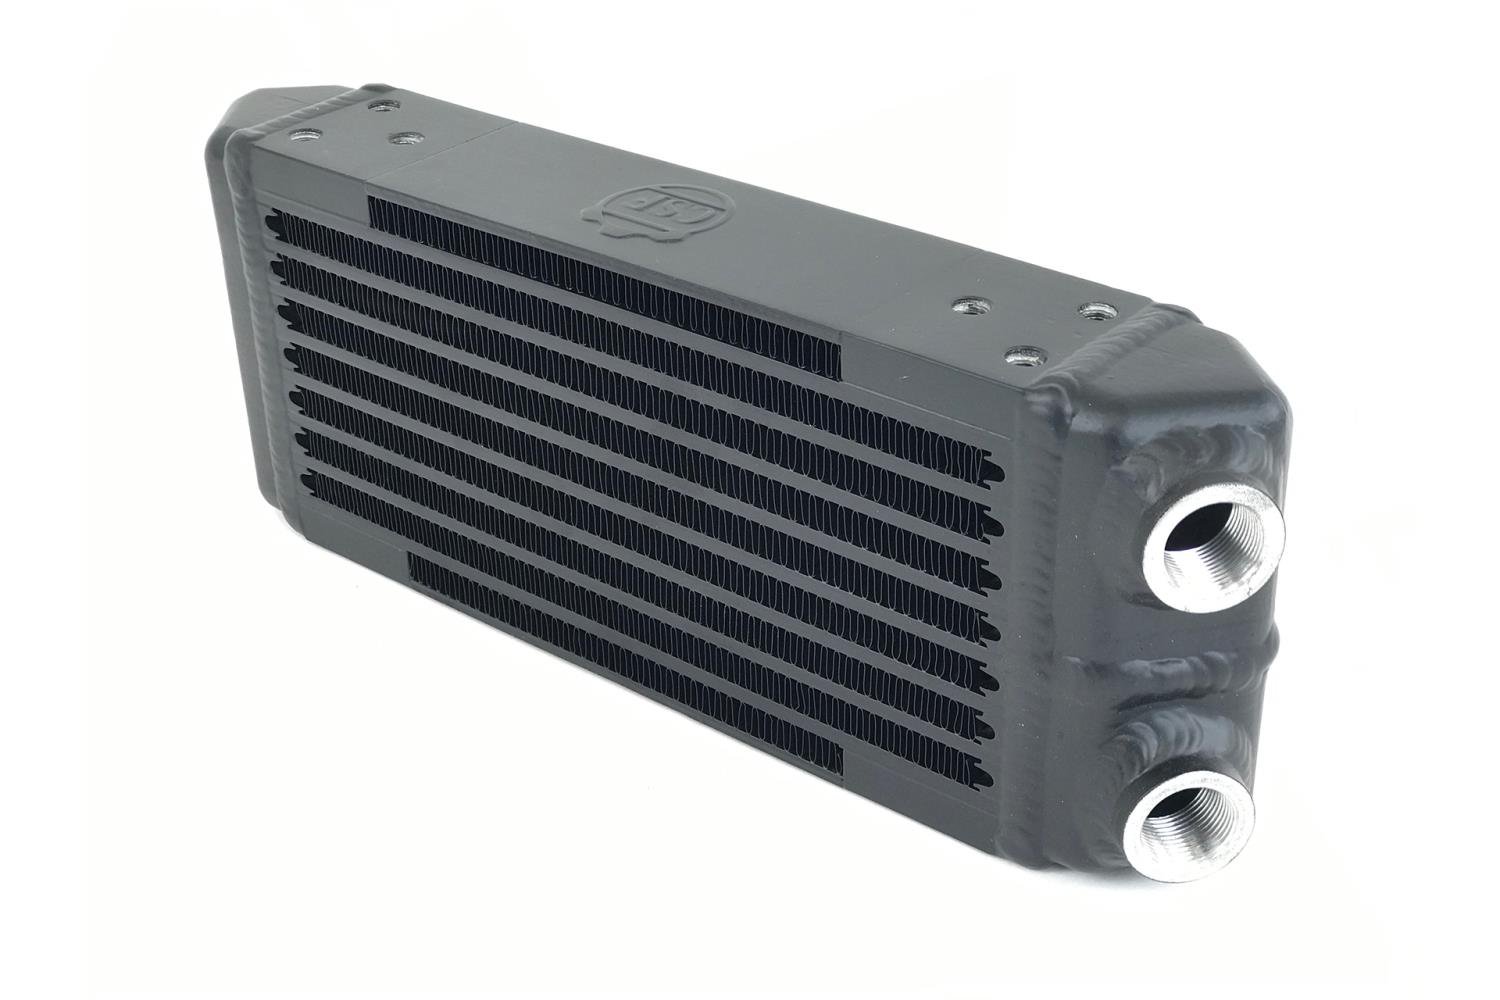 Universal Dual-Pass Oil Cooler - M22 x 1.5 connections - 13L x 4.75H x 2.16W